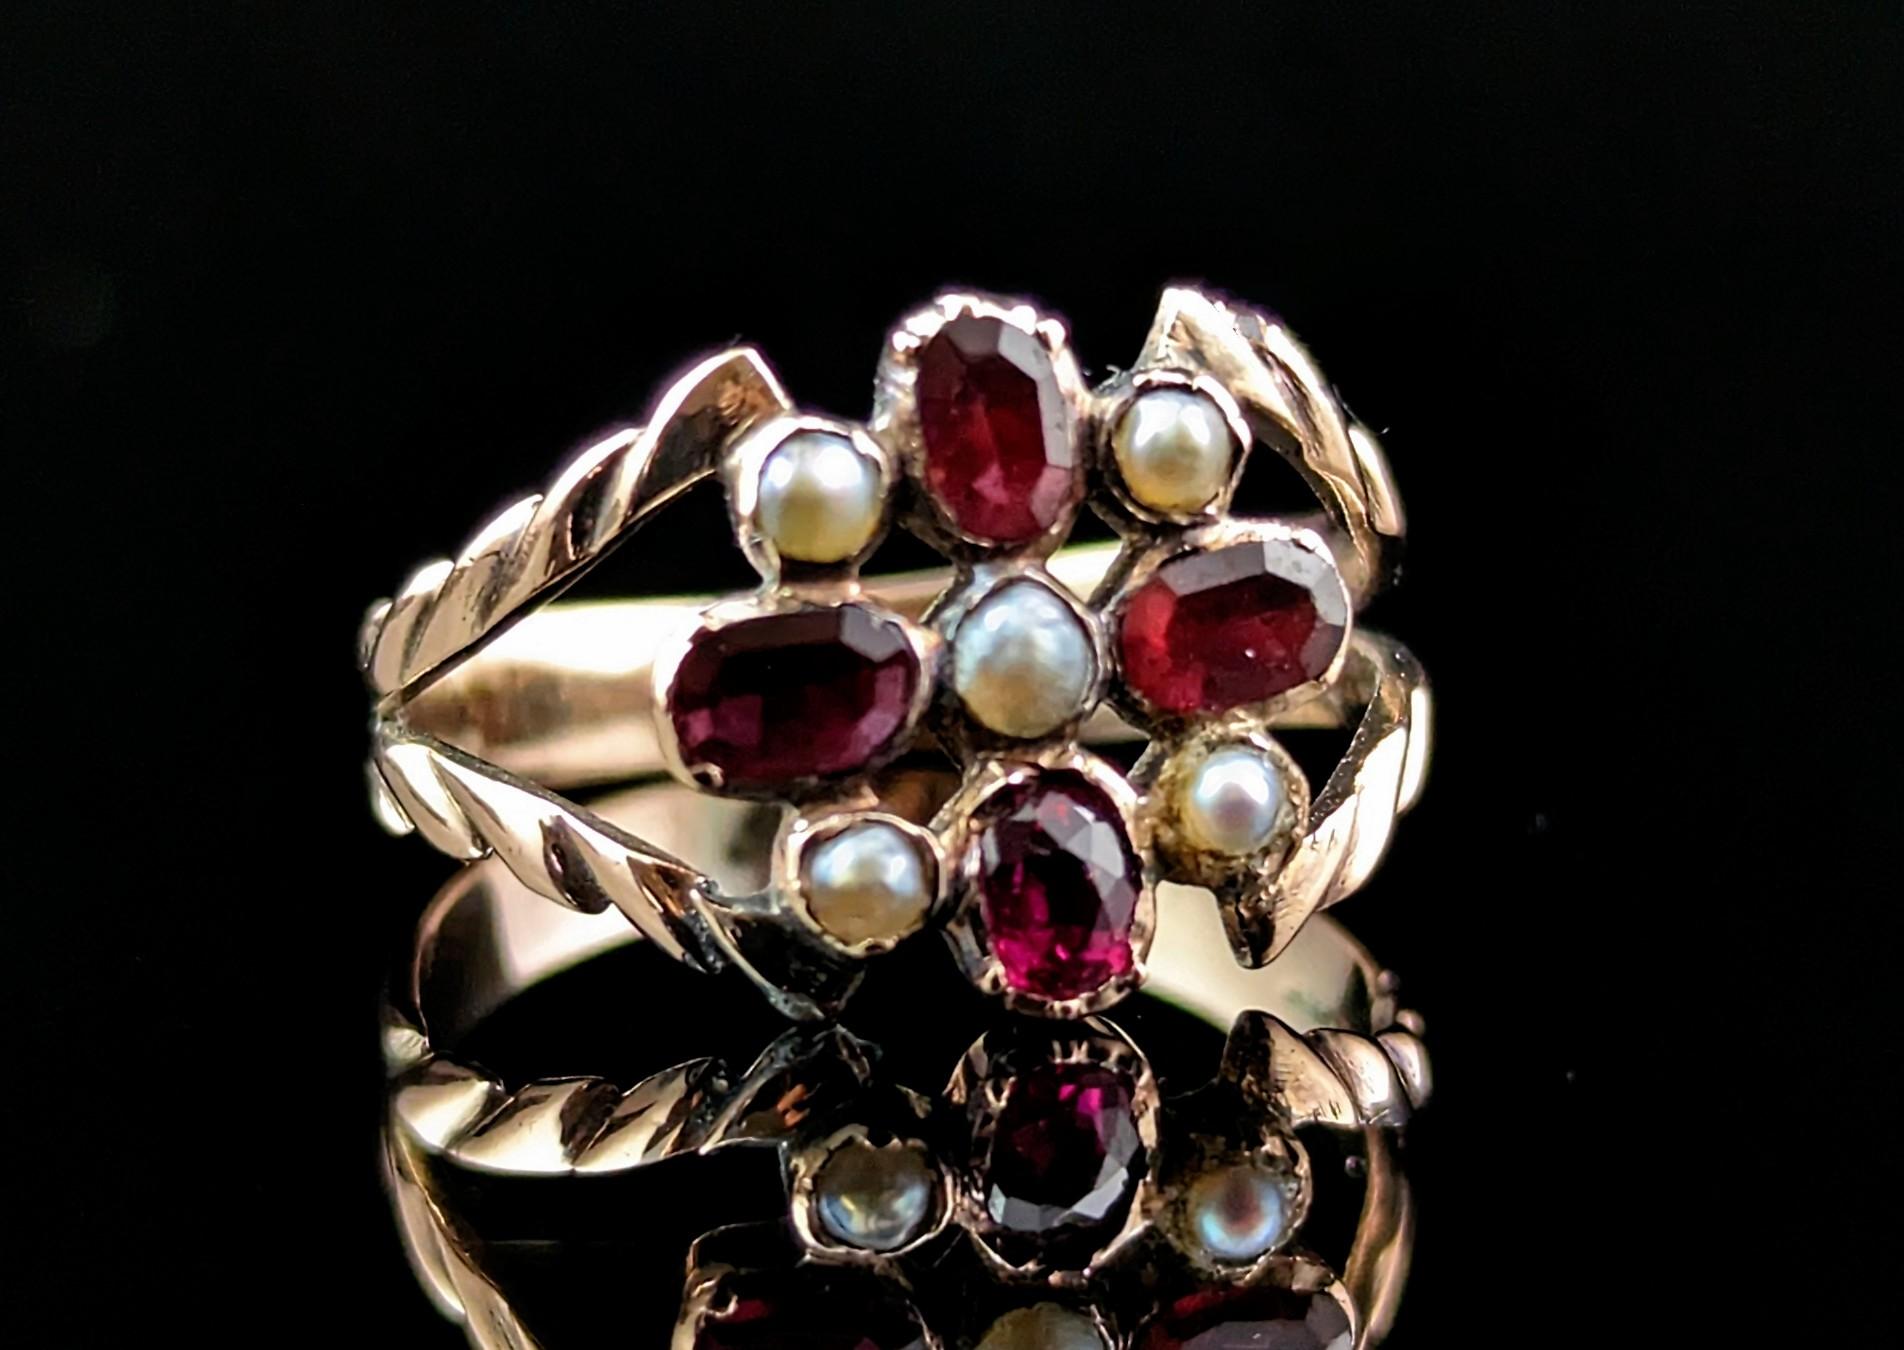 My word this beautiful little antique Regency era ring is so pretty and delightful.

A rare find are pieces from this era and you can most certainly see both Georgian and Victorian influences in the jewels of the regency period.

It features a